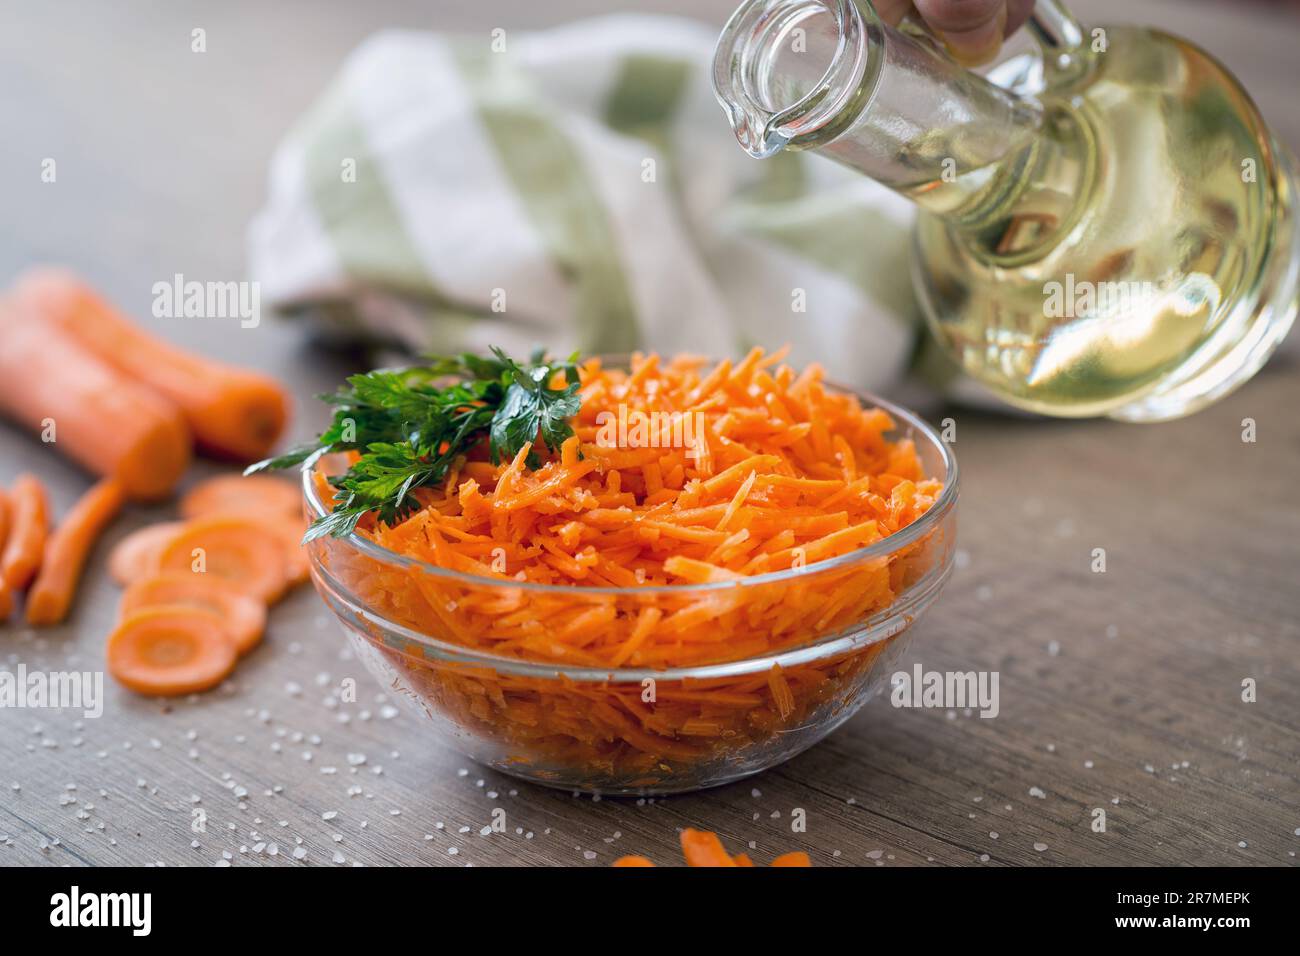 Salad with fresh carrot pouring oil Stock Photo